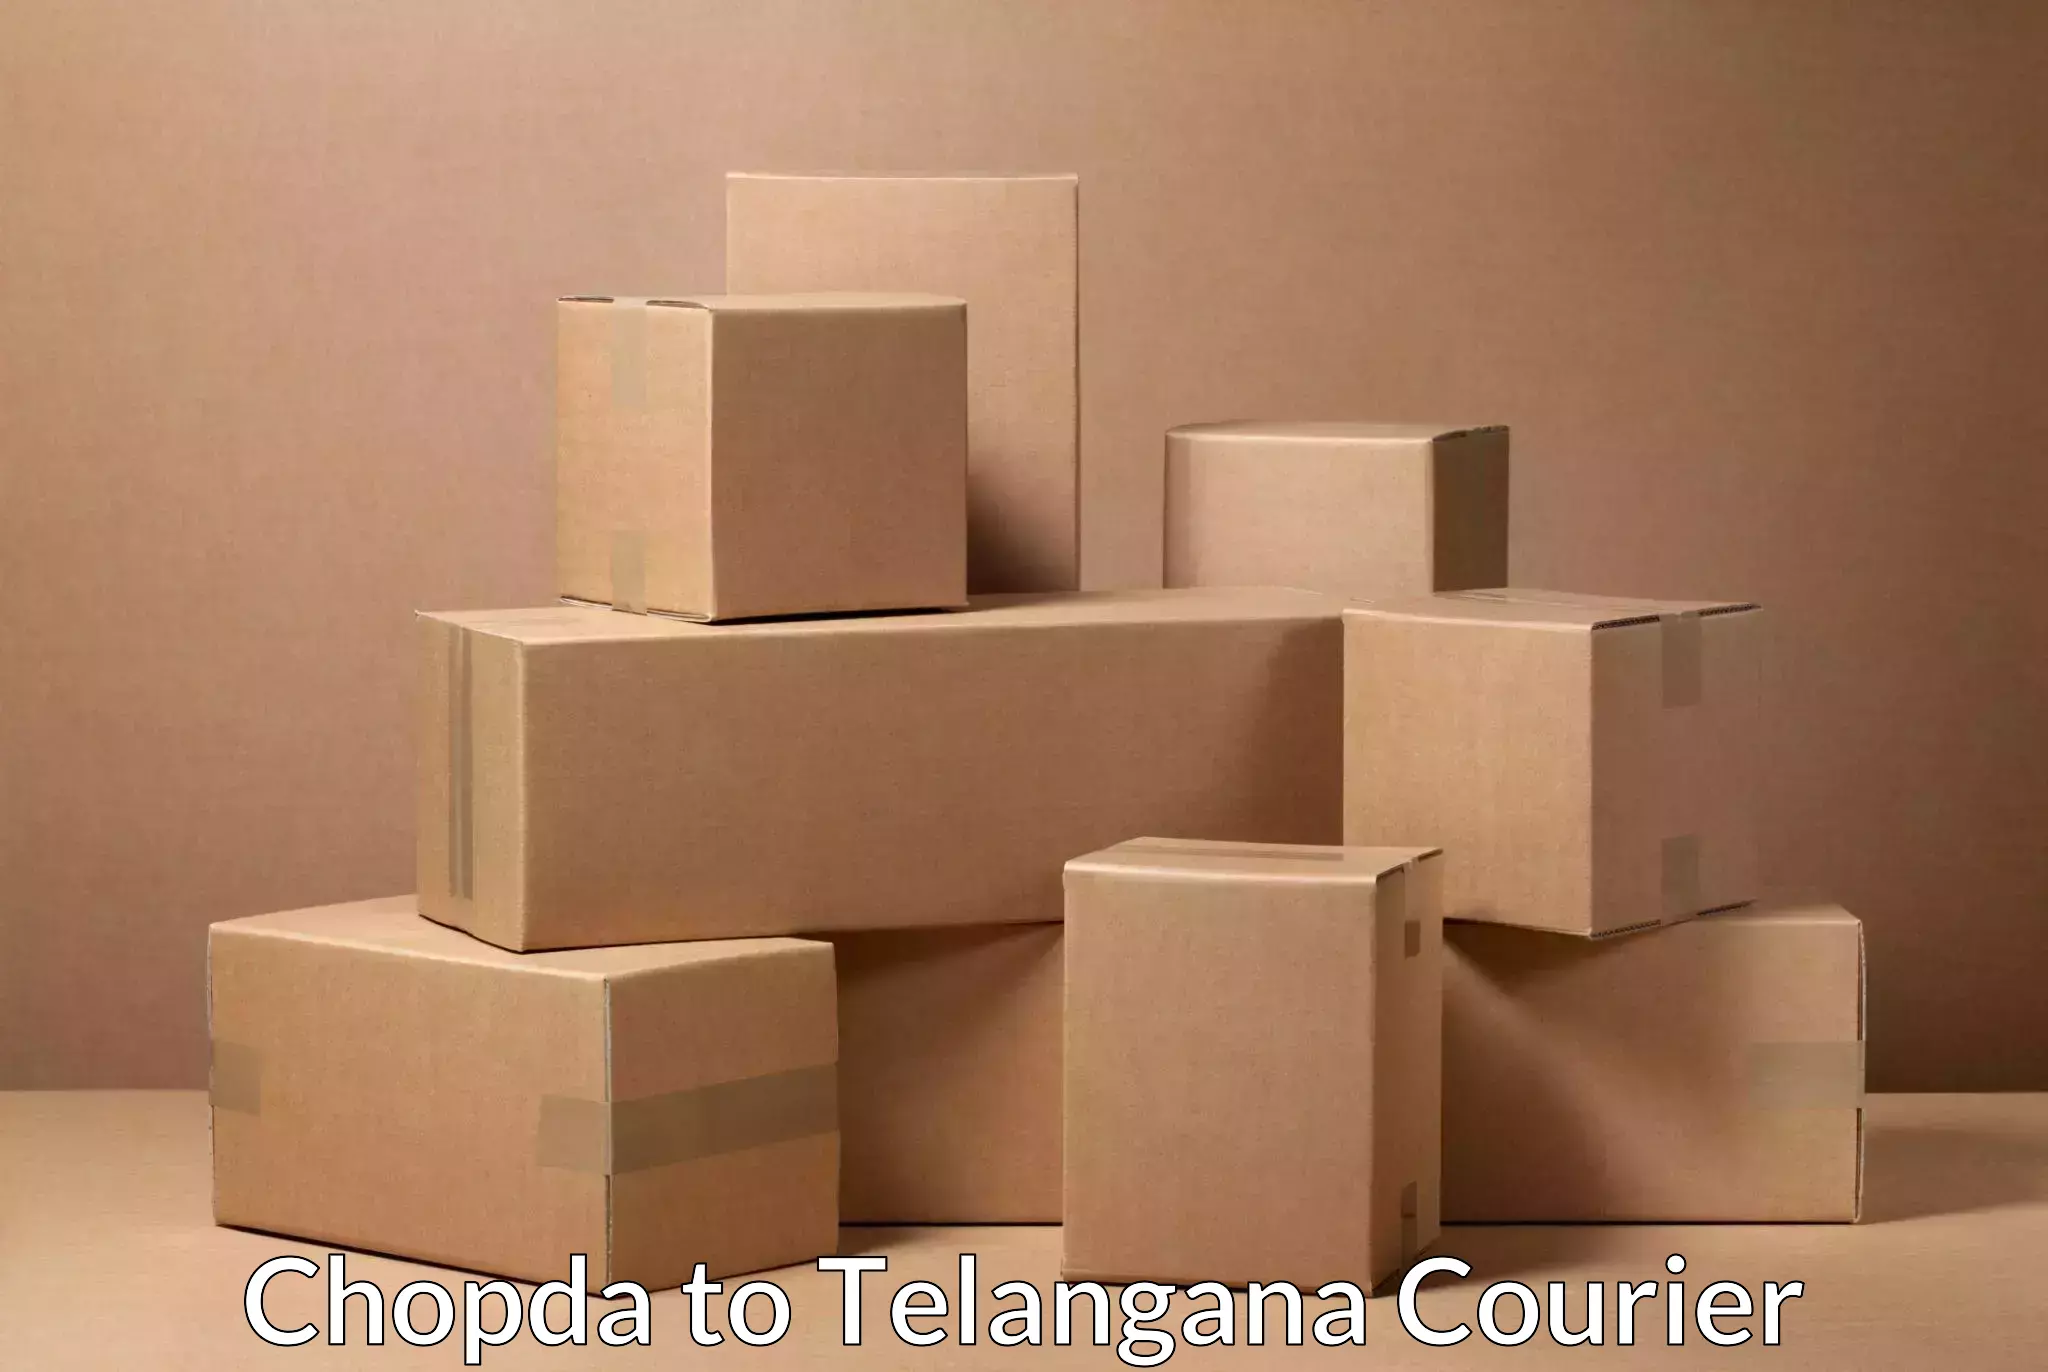 Efficient courier operations in Chopda to Wanaparthy